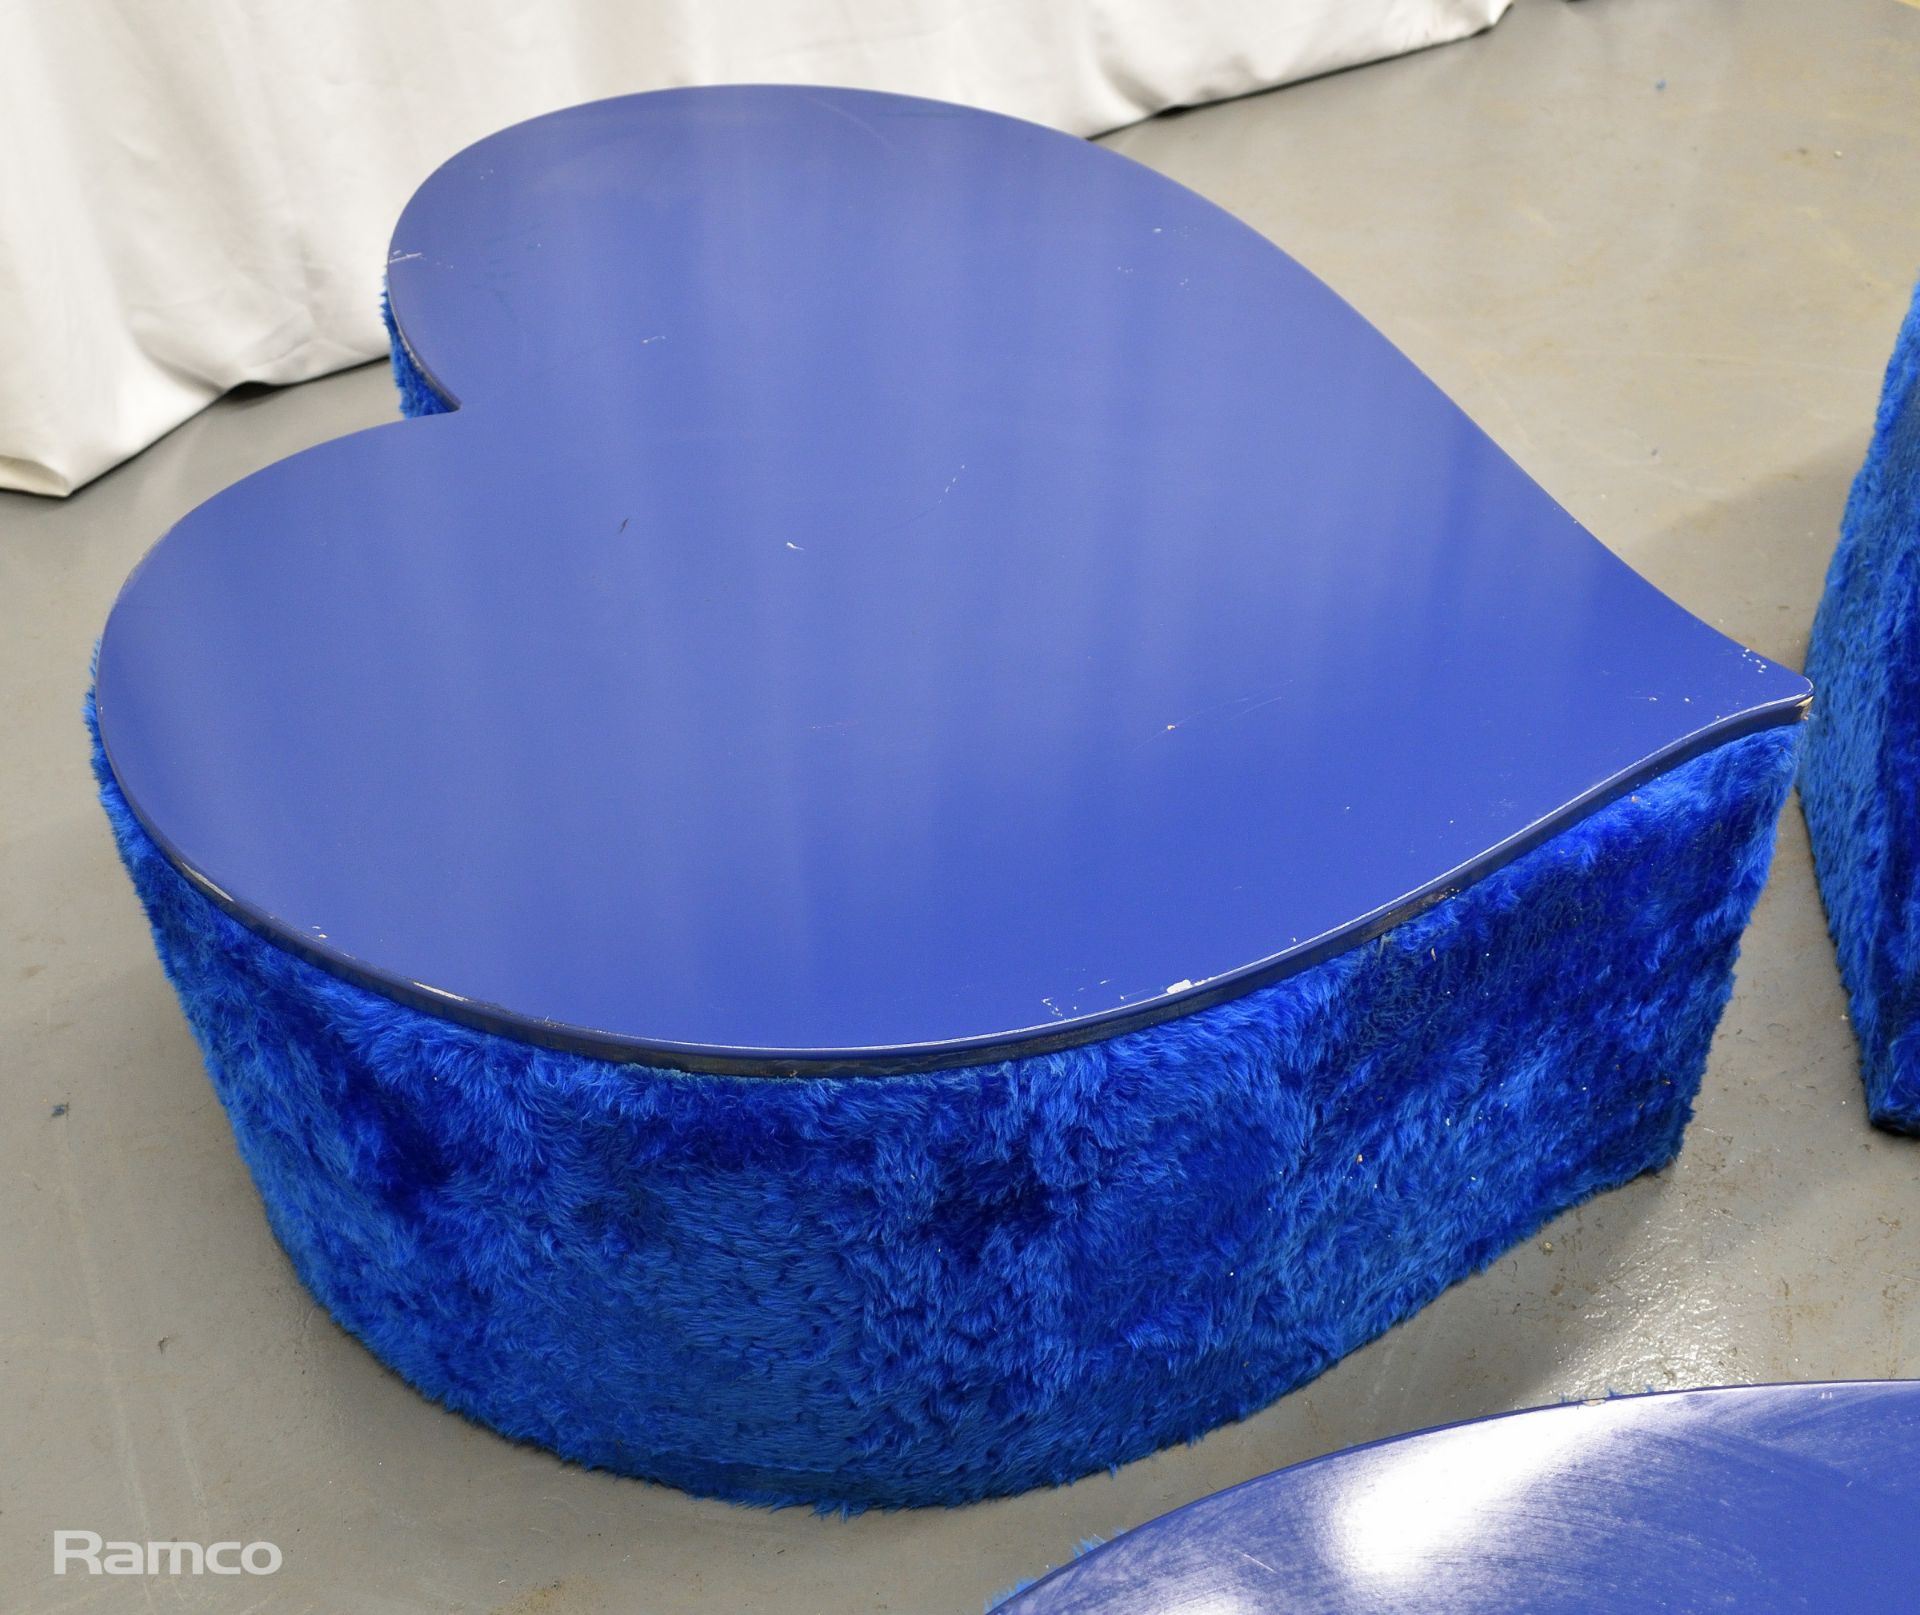 3x Asymmetrical heart shaped blue fur-covered wooden tables from countries' seating area - Image 9 of 14